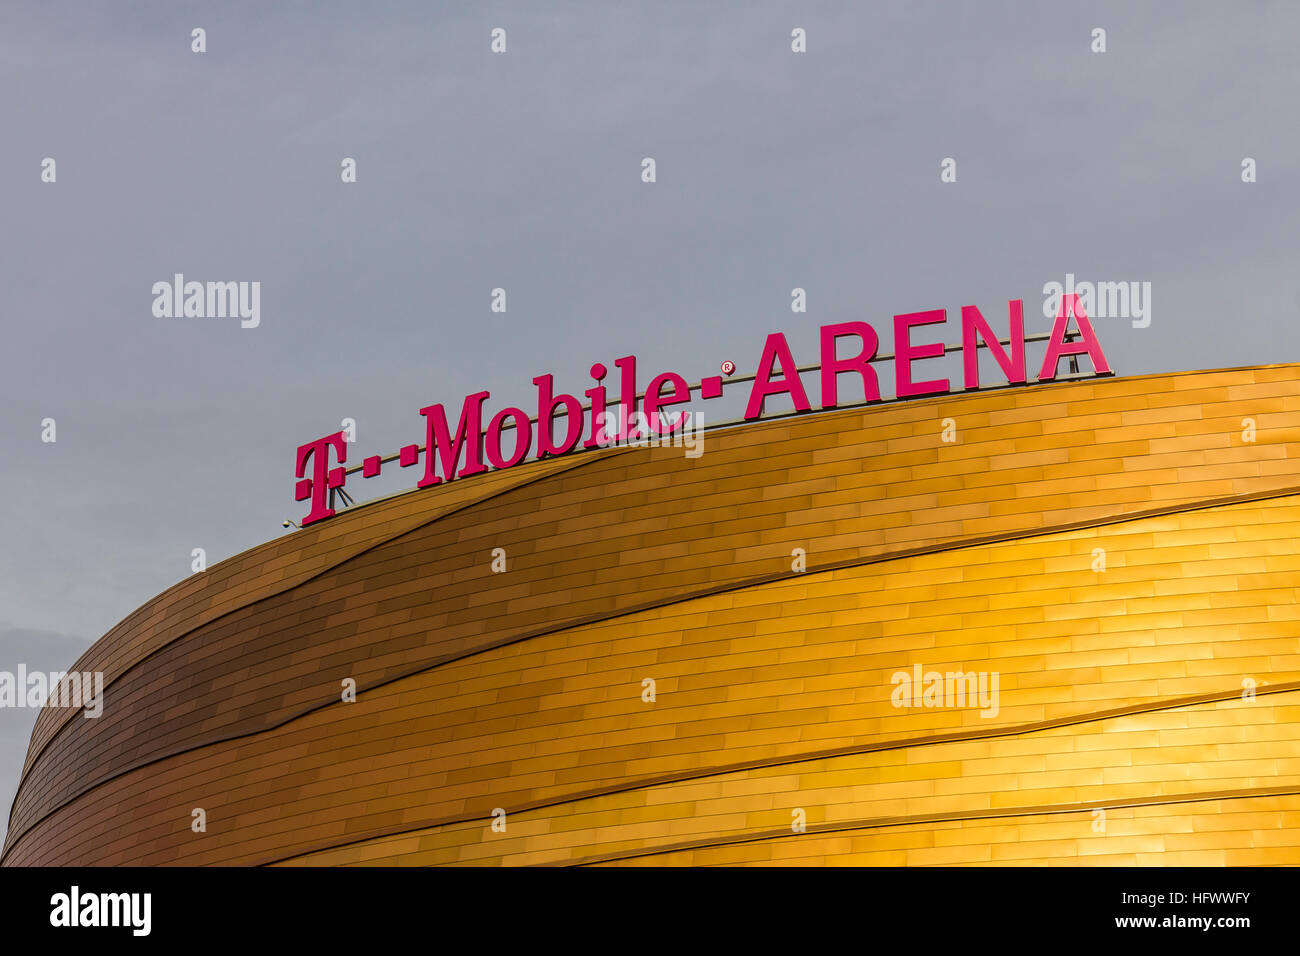 T mobile arena hi-res stock photography and images - Alamy